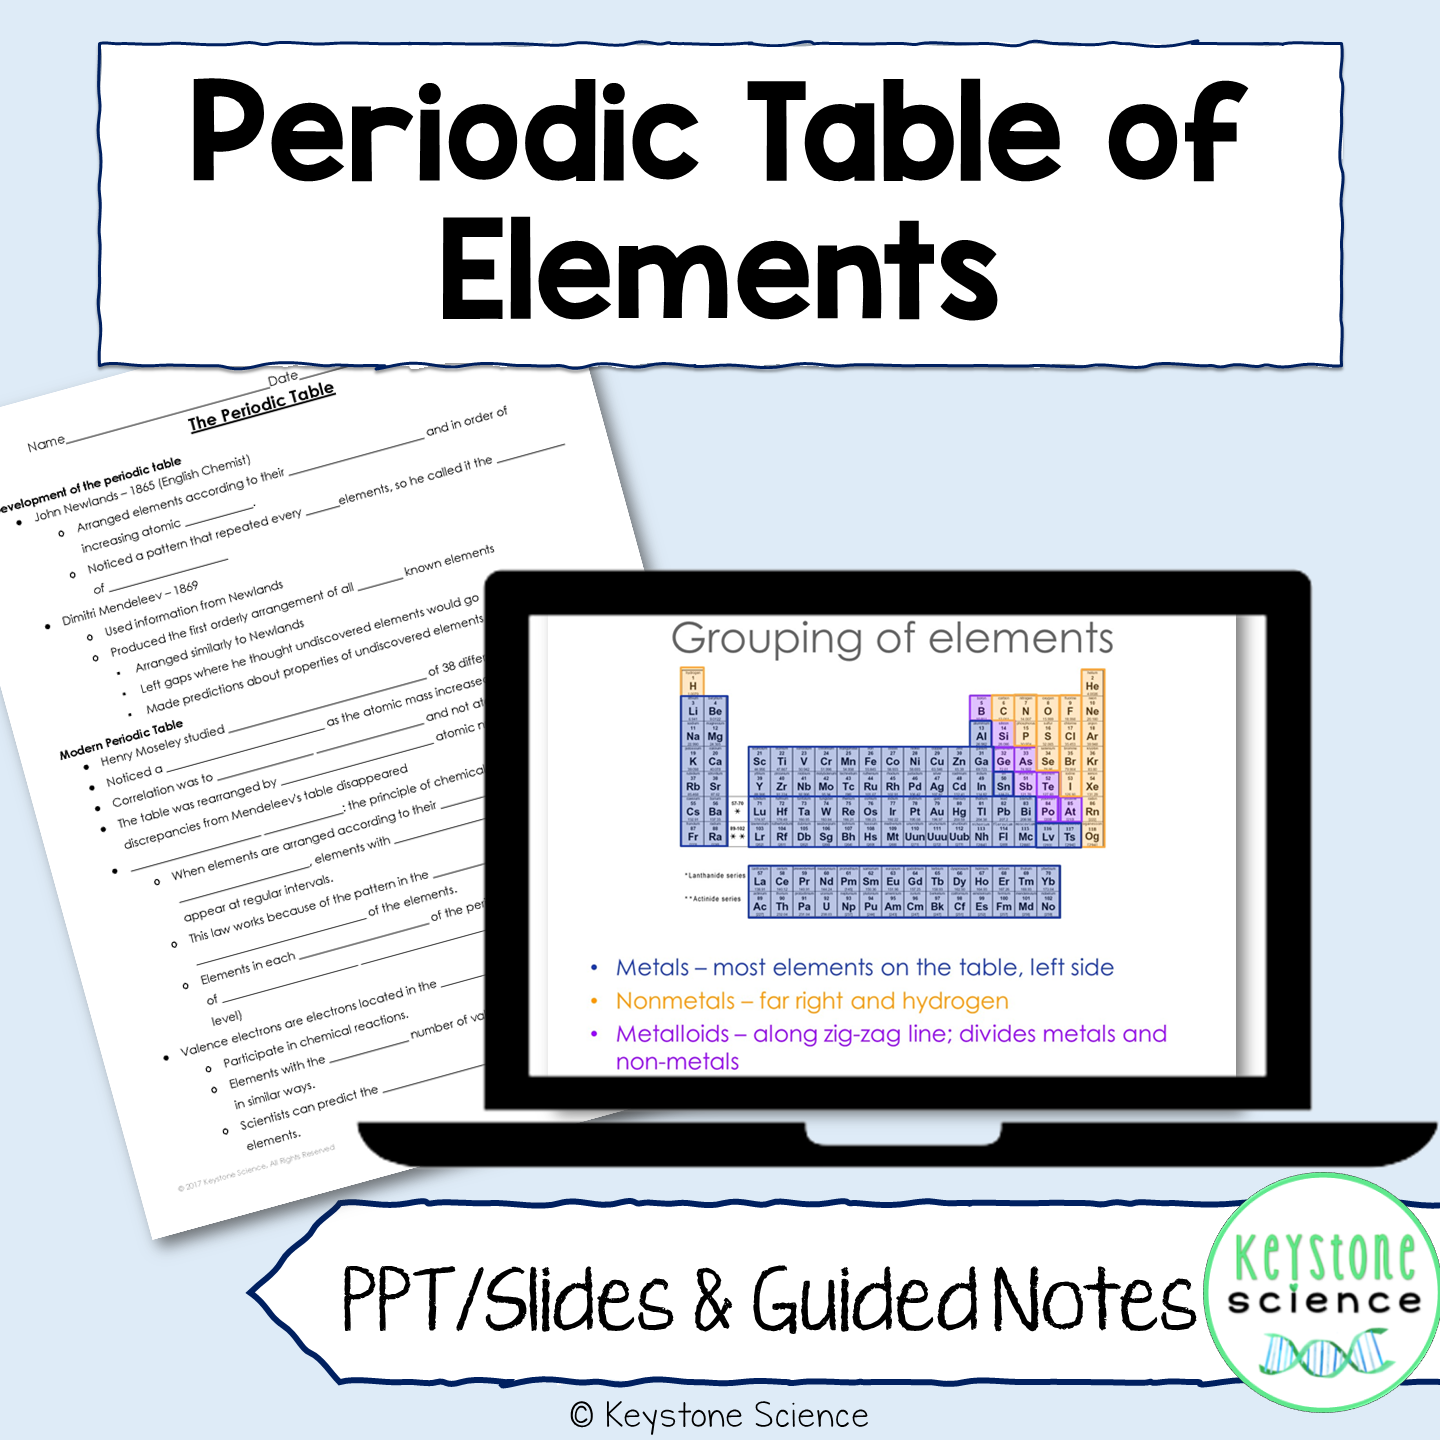 Periodic Table Organization and Trends PowerPoint with Guided Notes and KEY